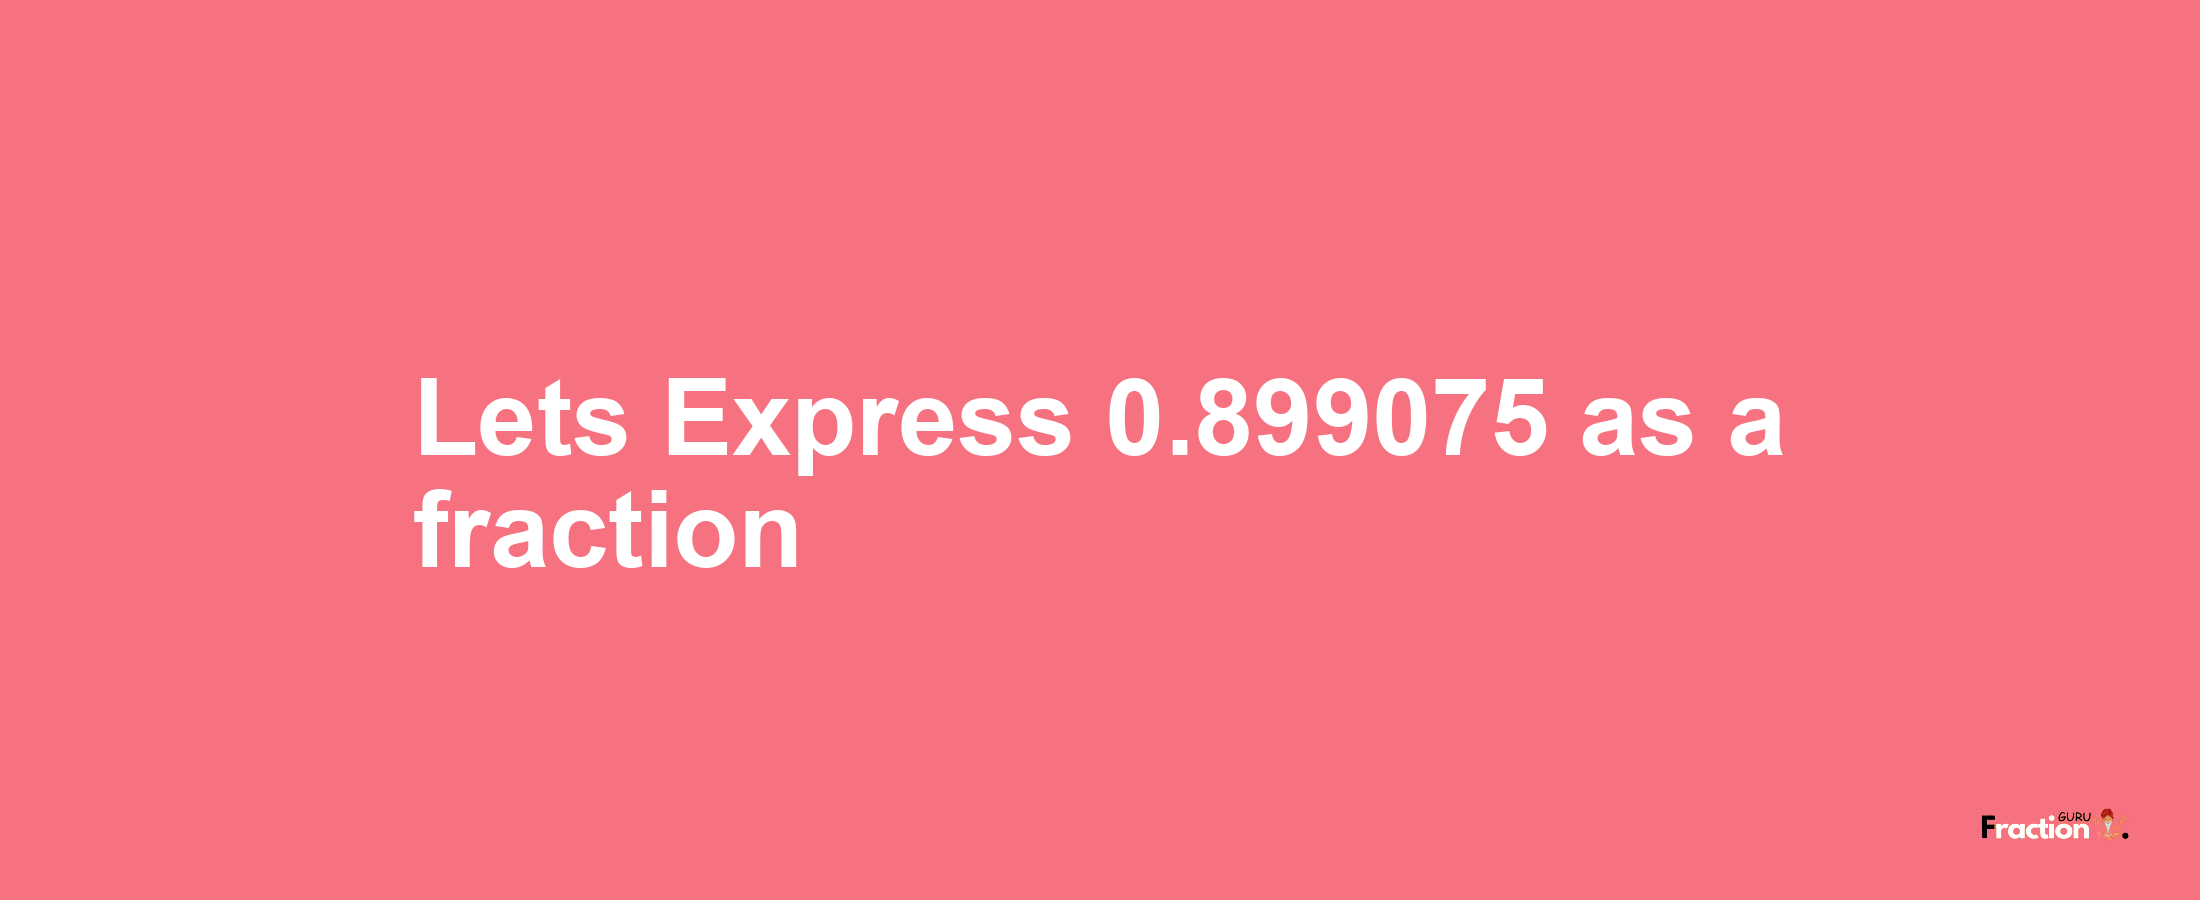 Lets Express 0.899075 as afraction